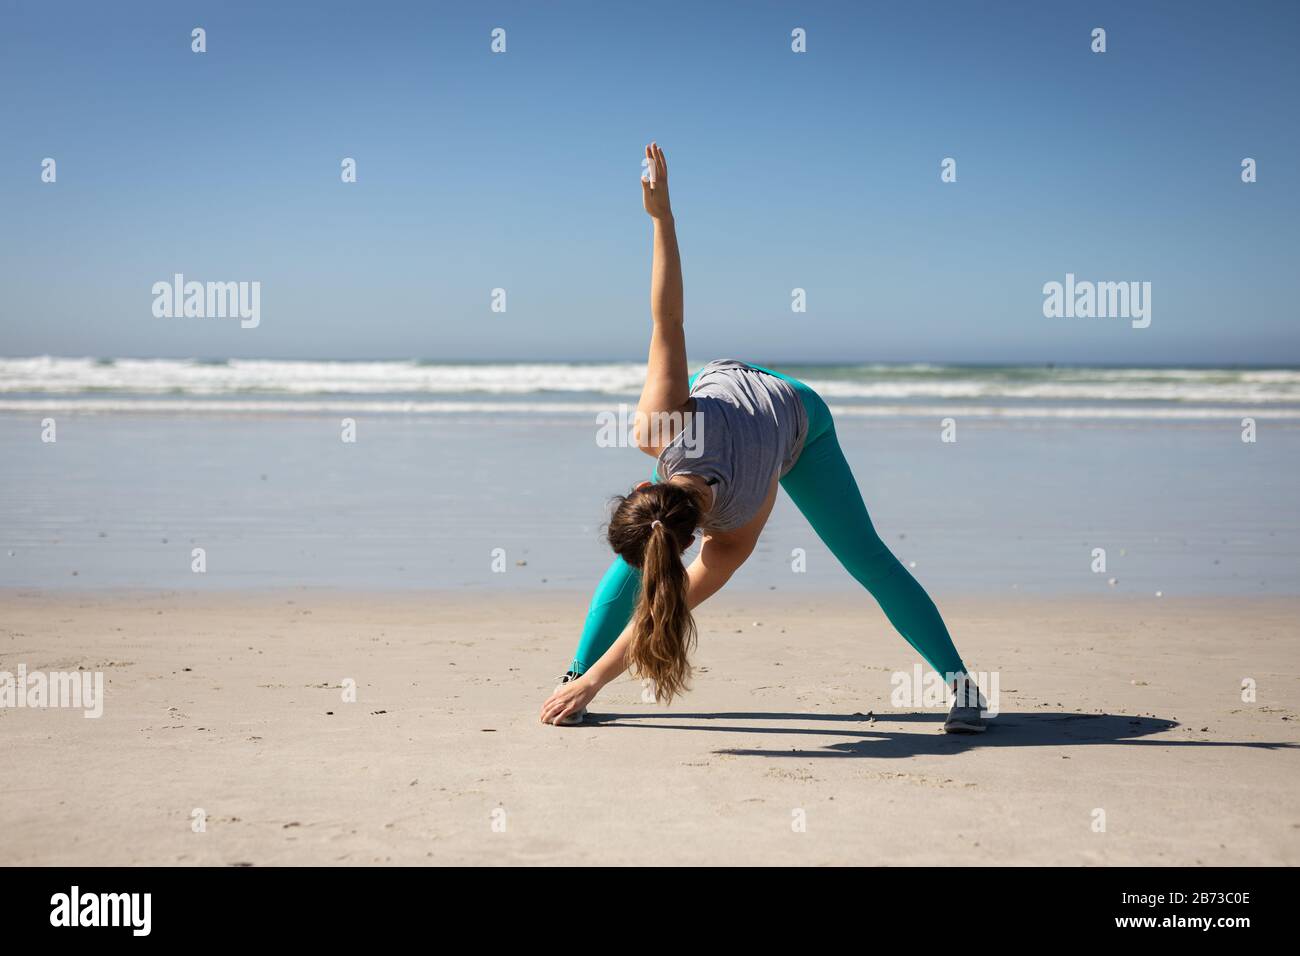 Front view of woman doing a yoga position at the beach Stock Photo